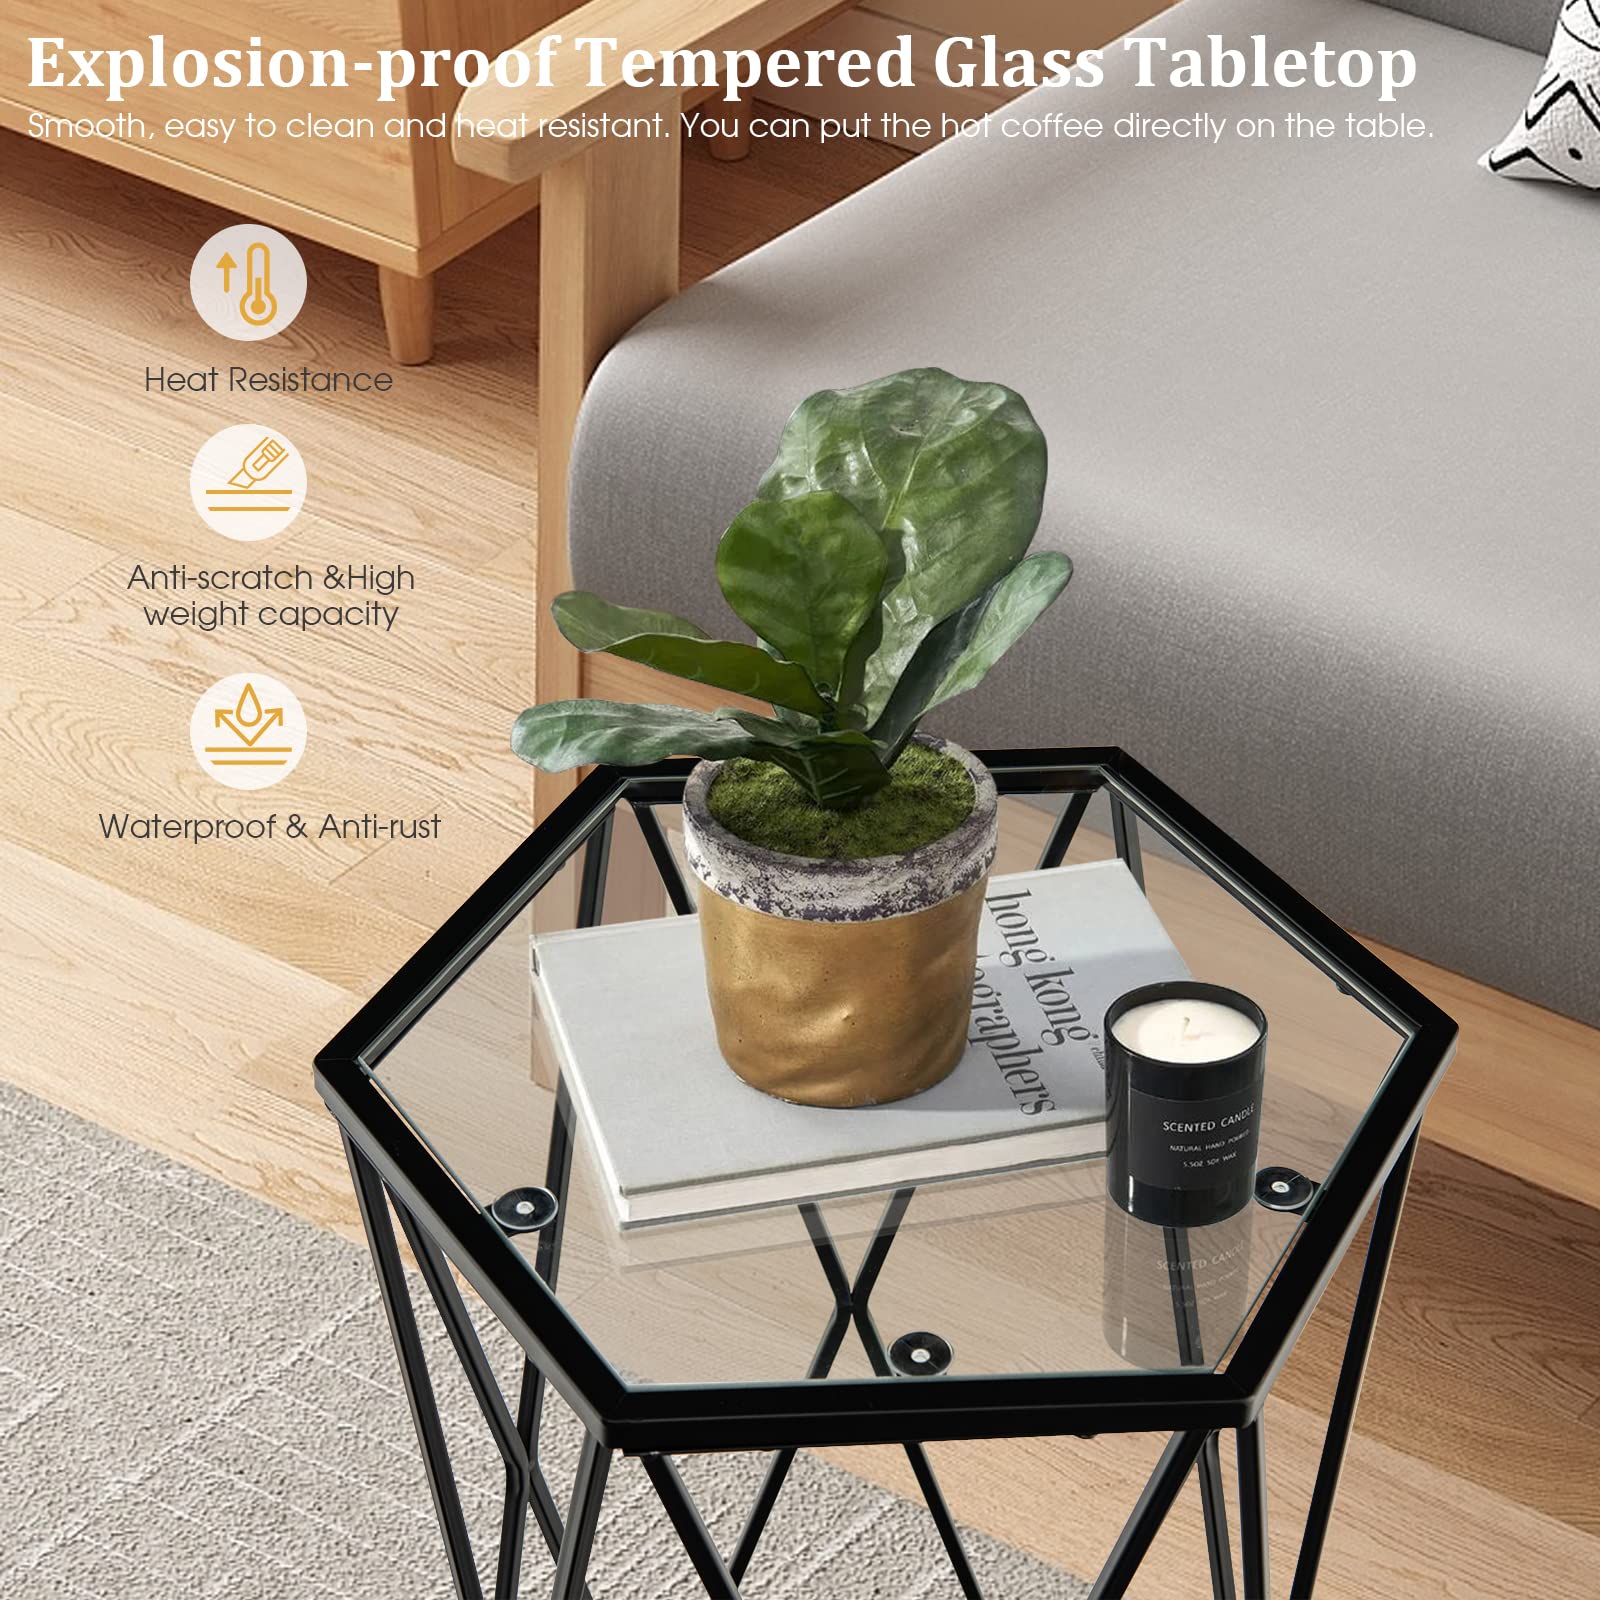 Giantex End Table w/Glass Top, Metal Frame, Small Coffee Accent Table for Small Space( 16" x 13.5" x 24")